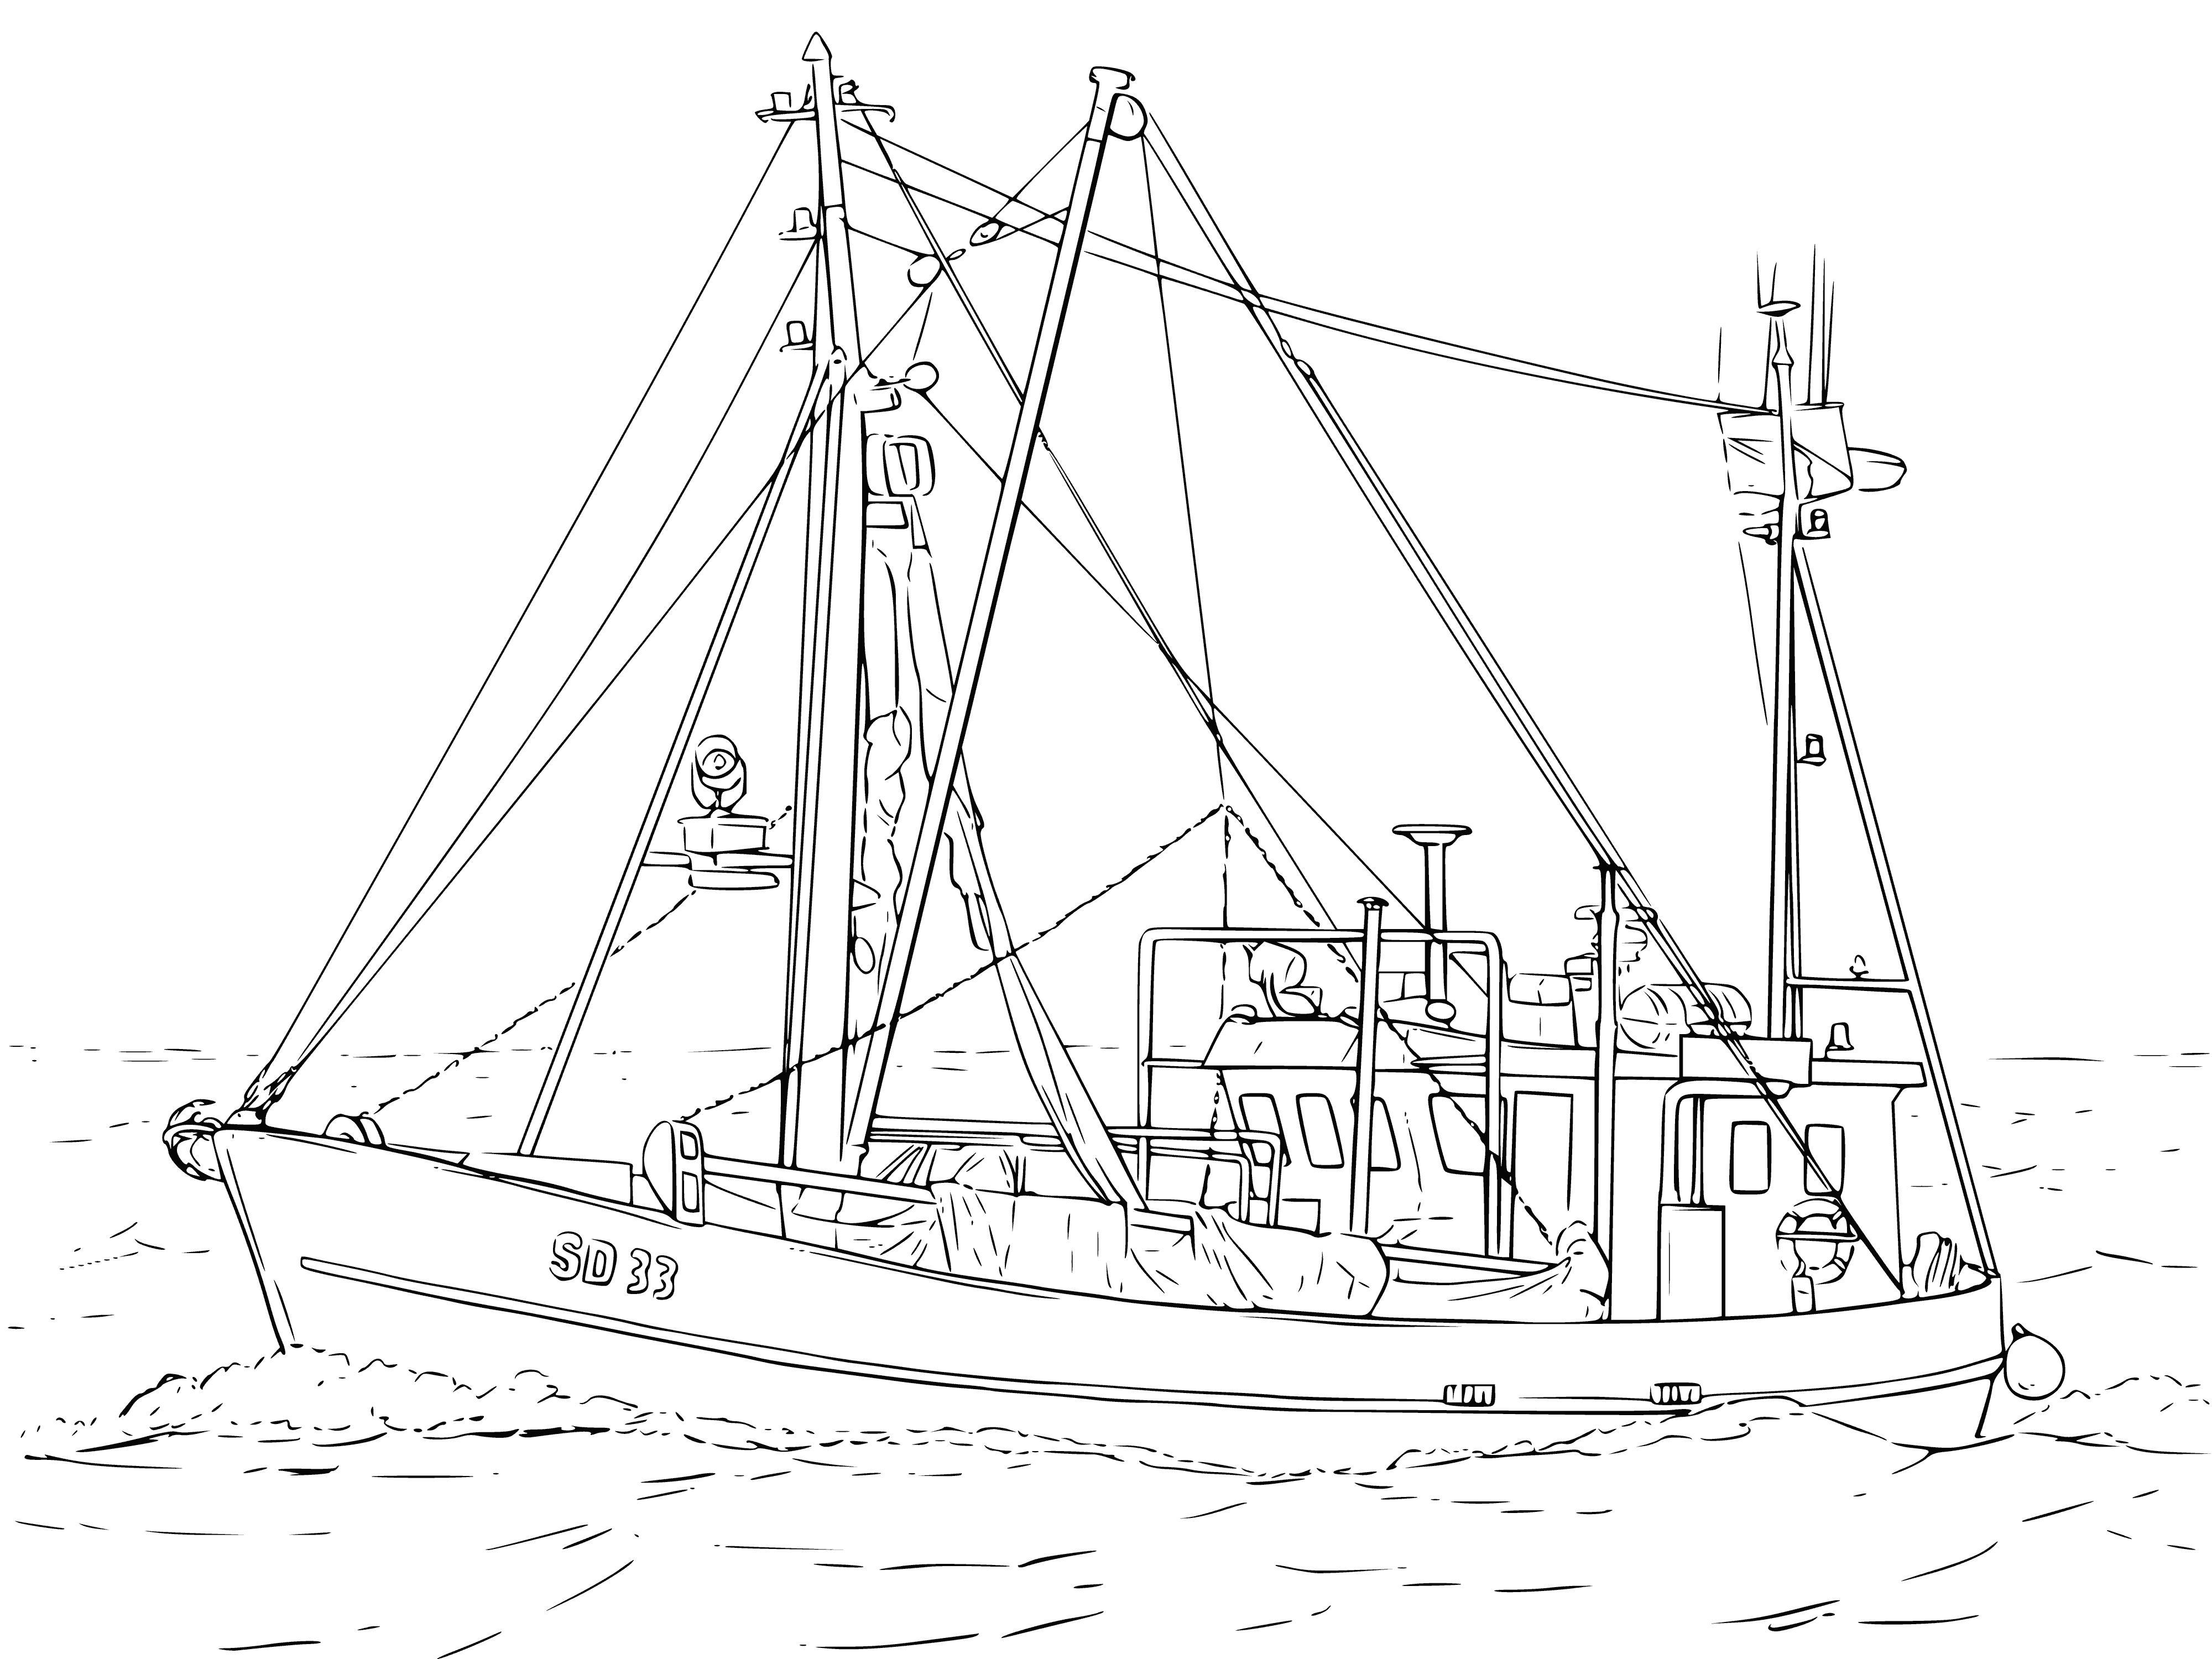 coloring page: Two boats docked at pier w/ people & seagulls; one gr&wh, one blue&wh, both w/ furled sails.